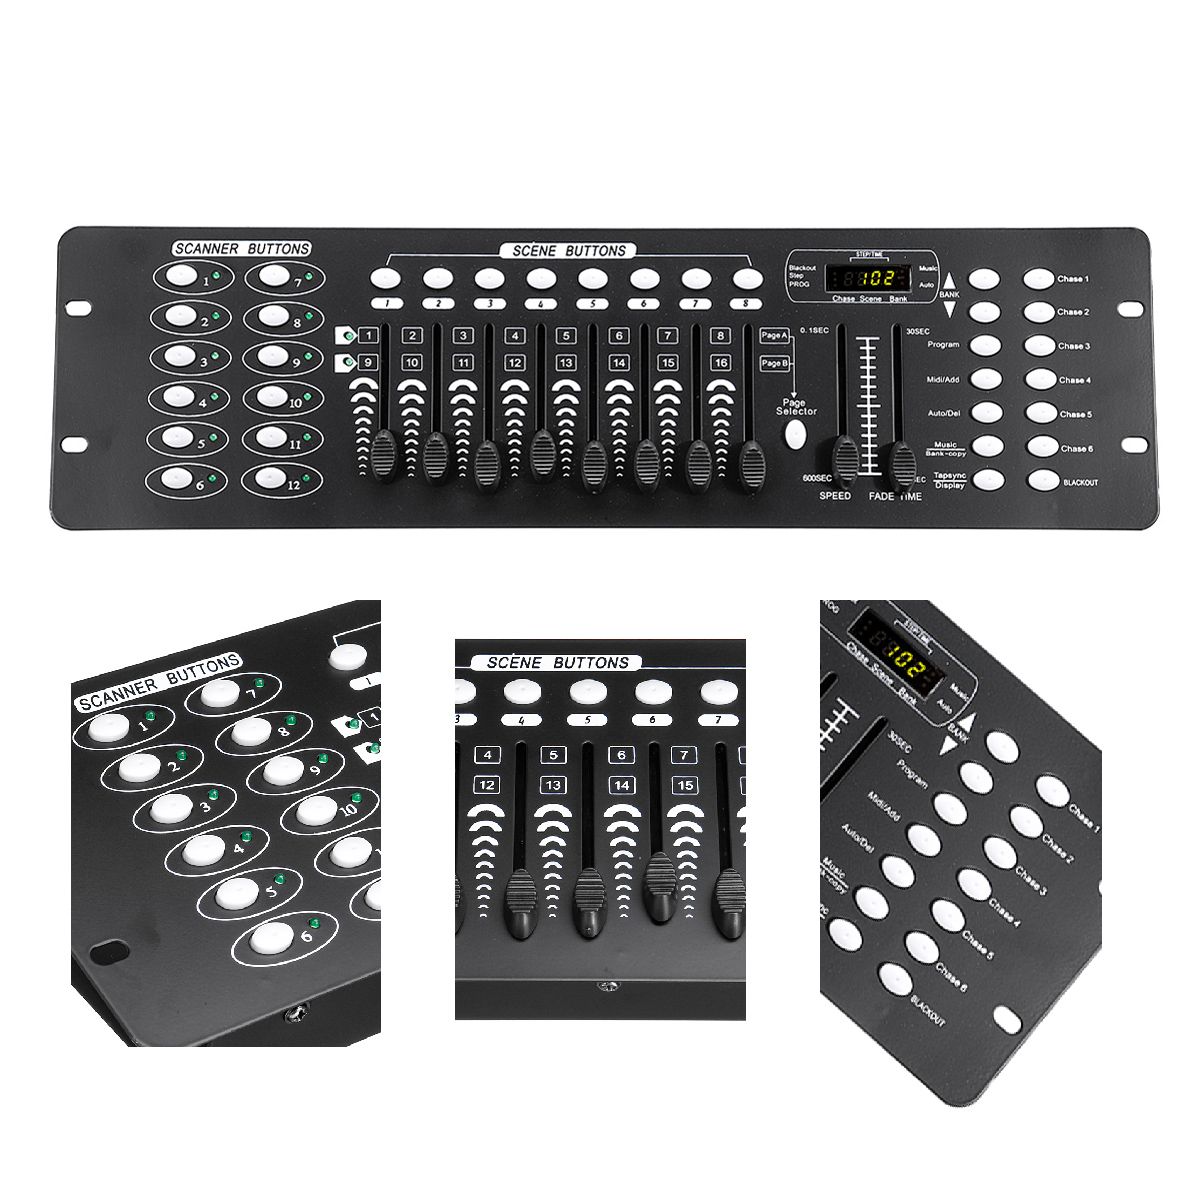 192CH-Stage-Lighting-DMX512-Controller-Lamp-DJ-Disco-Wending-Party-Show-Console-Dimmer-1583555